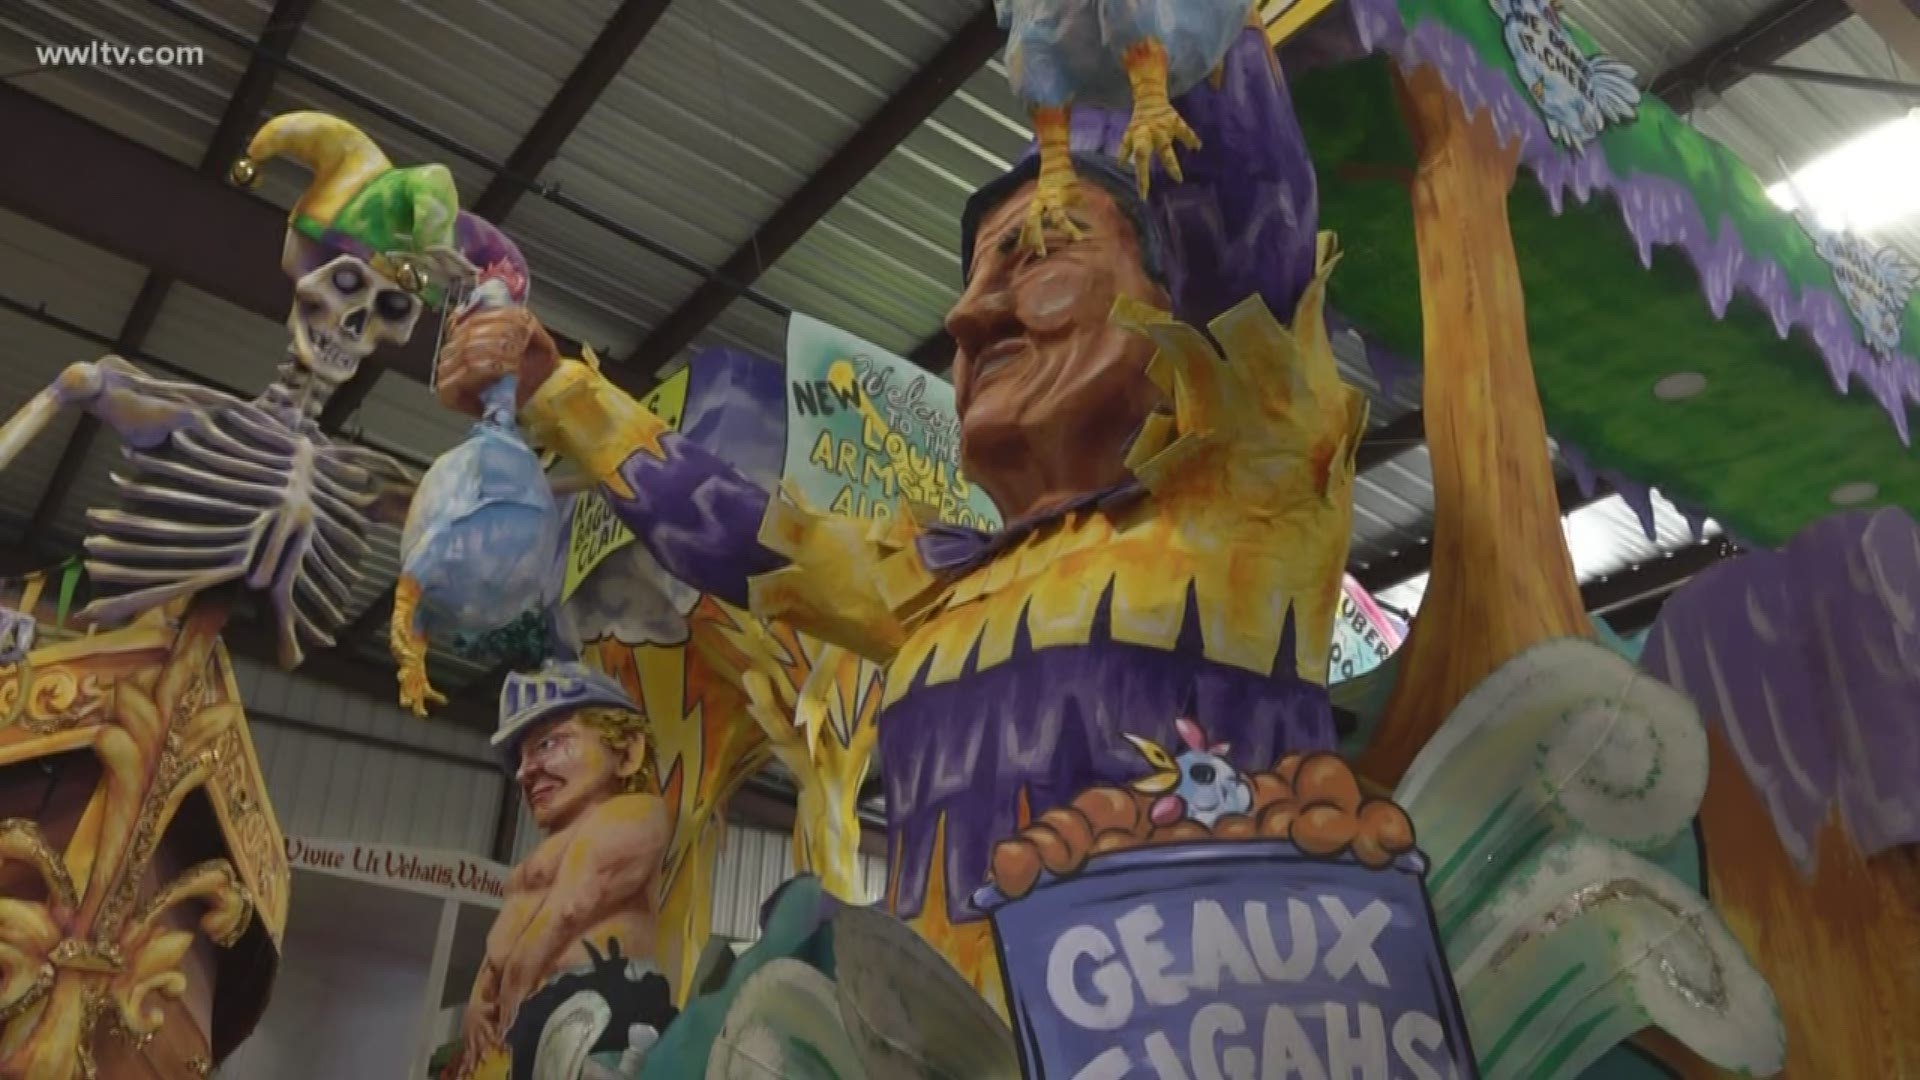 An inside look at Le Krewe d'Etat parade, which rolls Uptown Friday and is known for its satirical themes and original floats.